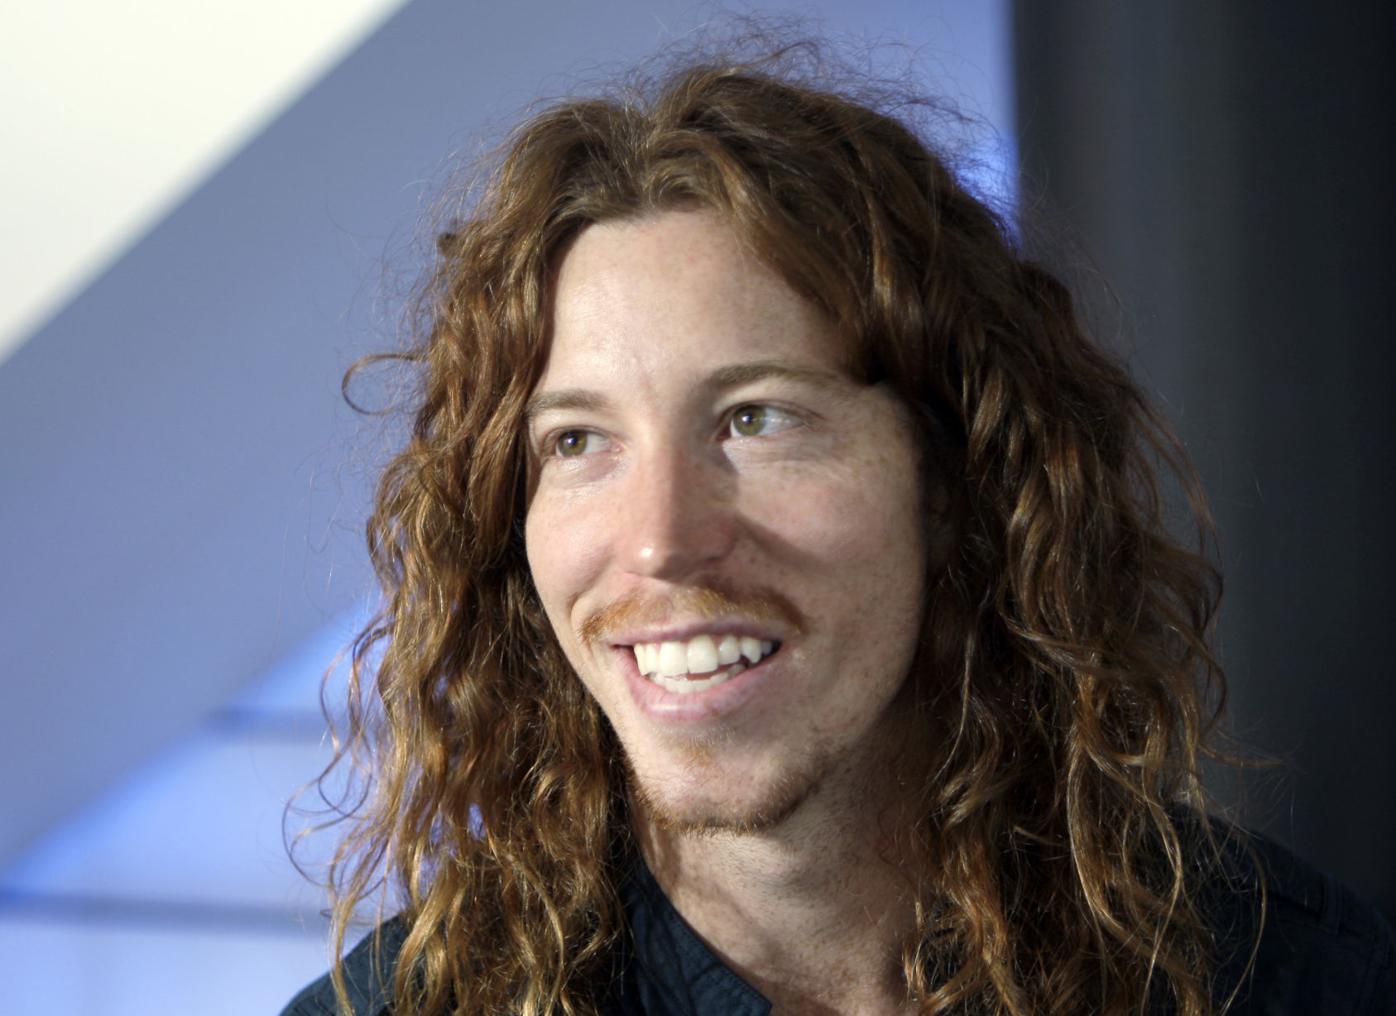 Shaun White with long hair - The Flying Tomato